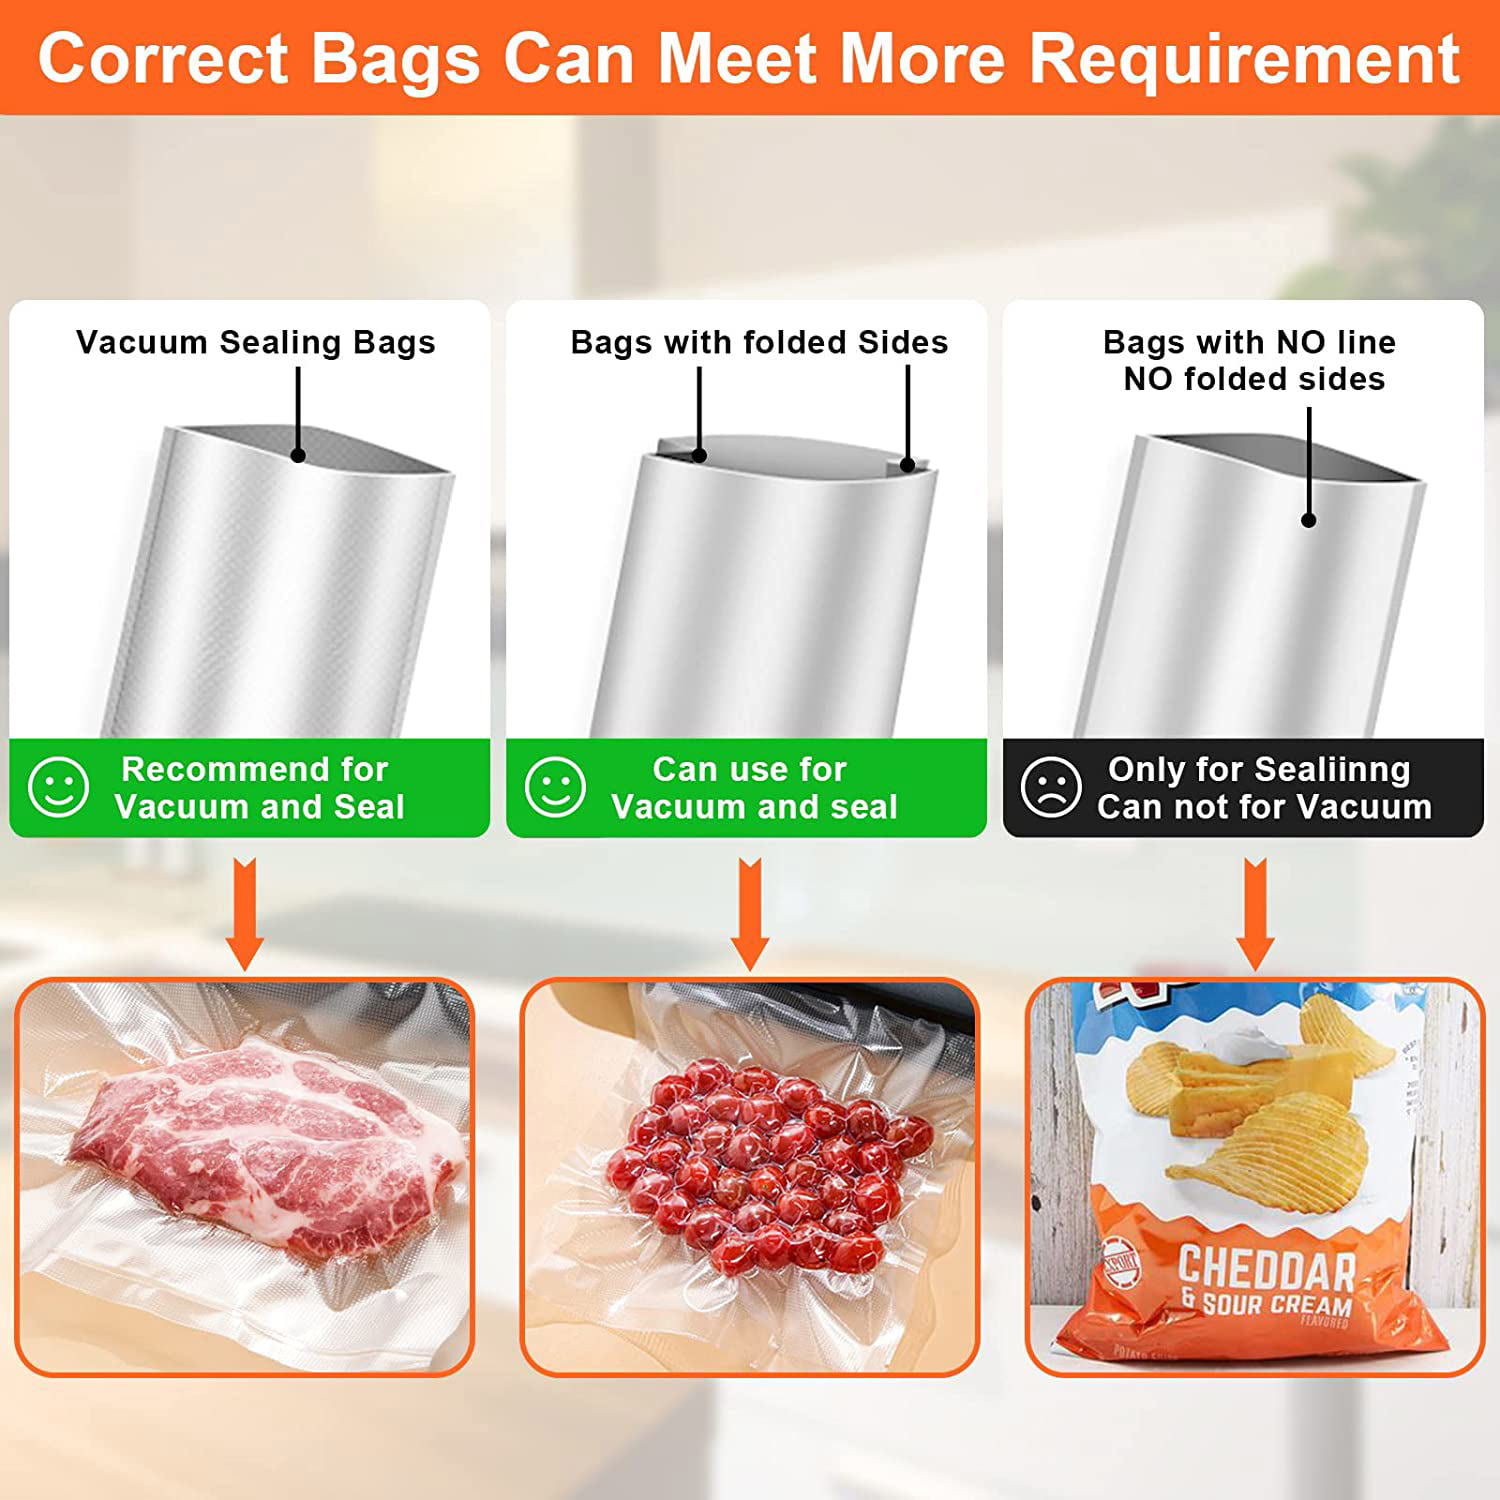 RAMJOY Vacuum Sealer, Automatic, Smart Dry/Moist Food Sealer Machine with 5  Adjustable Modes, Vacuum Sealer for Food Storage with 10 PCS Bags & Air  Suction Hose, Silver 